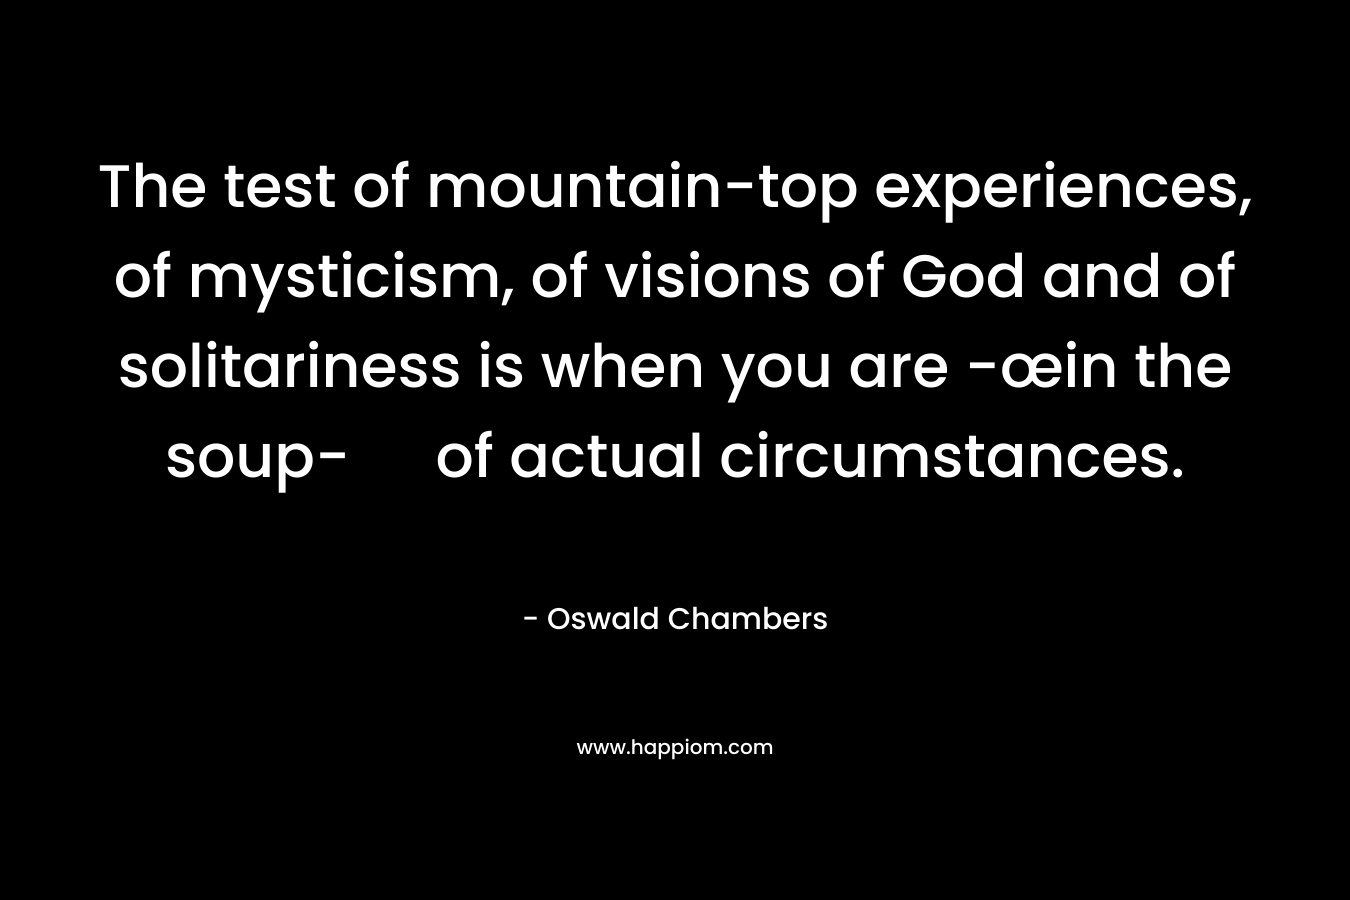 The test of mountain-top experiences, of mysticism, of visions of God and of solitariness is when you are -œin the soup- of actual circumstances. – Oswald Chambers